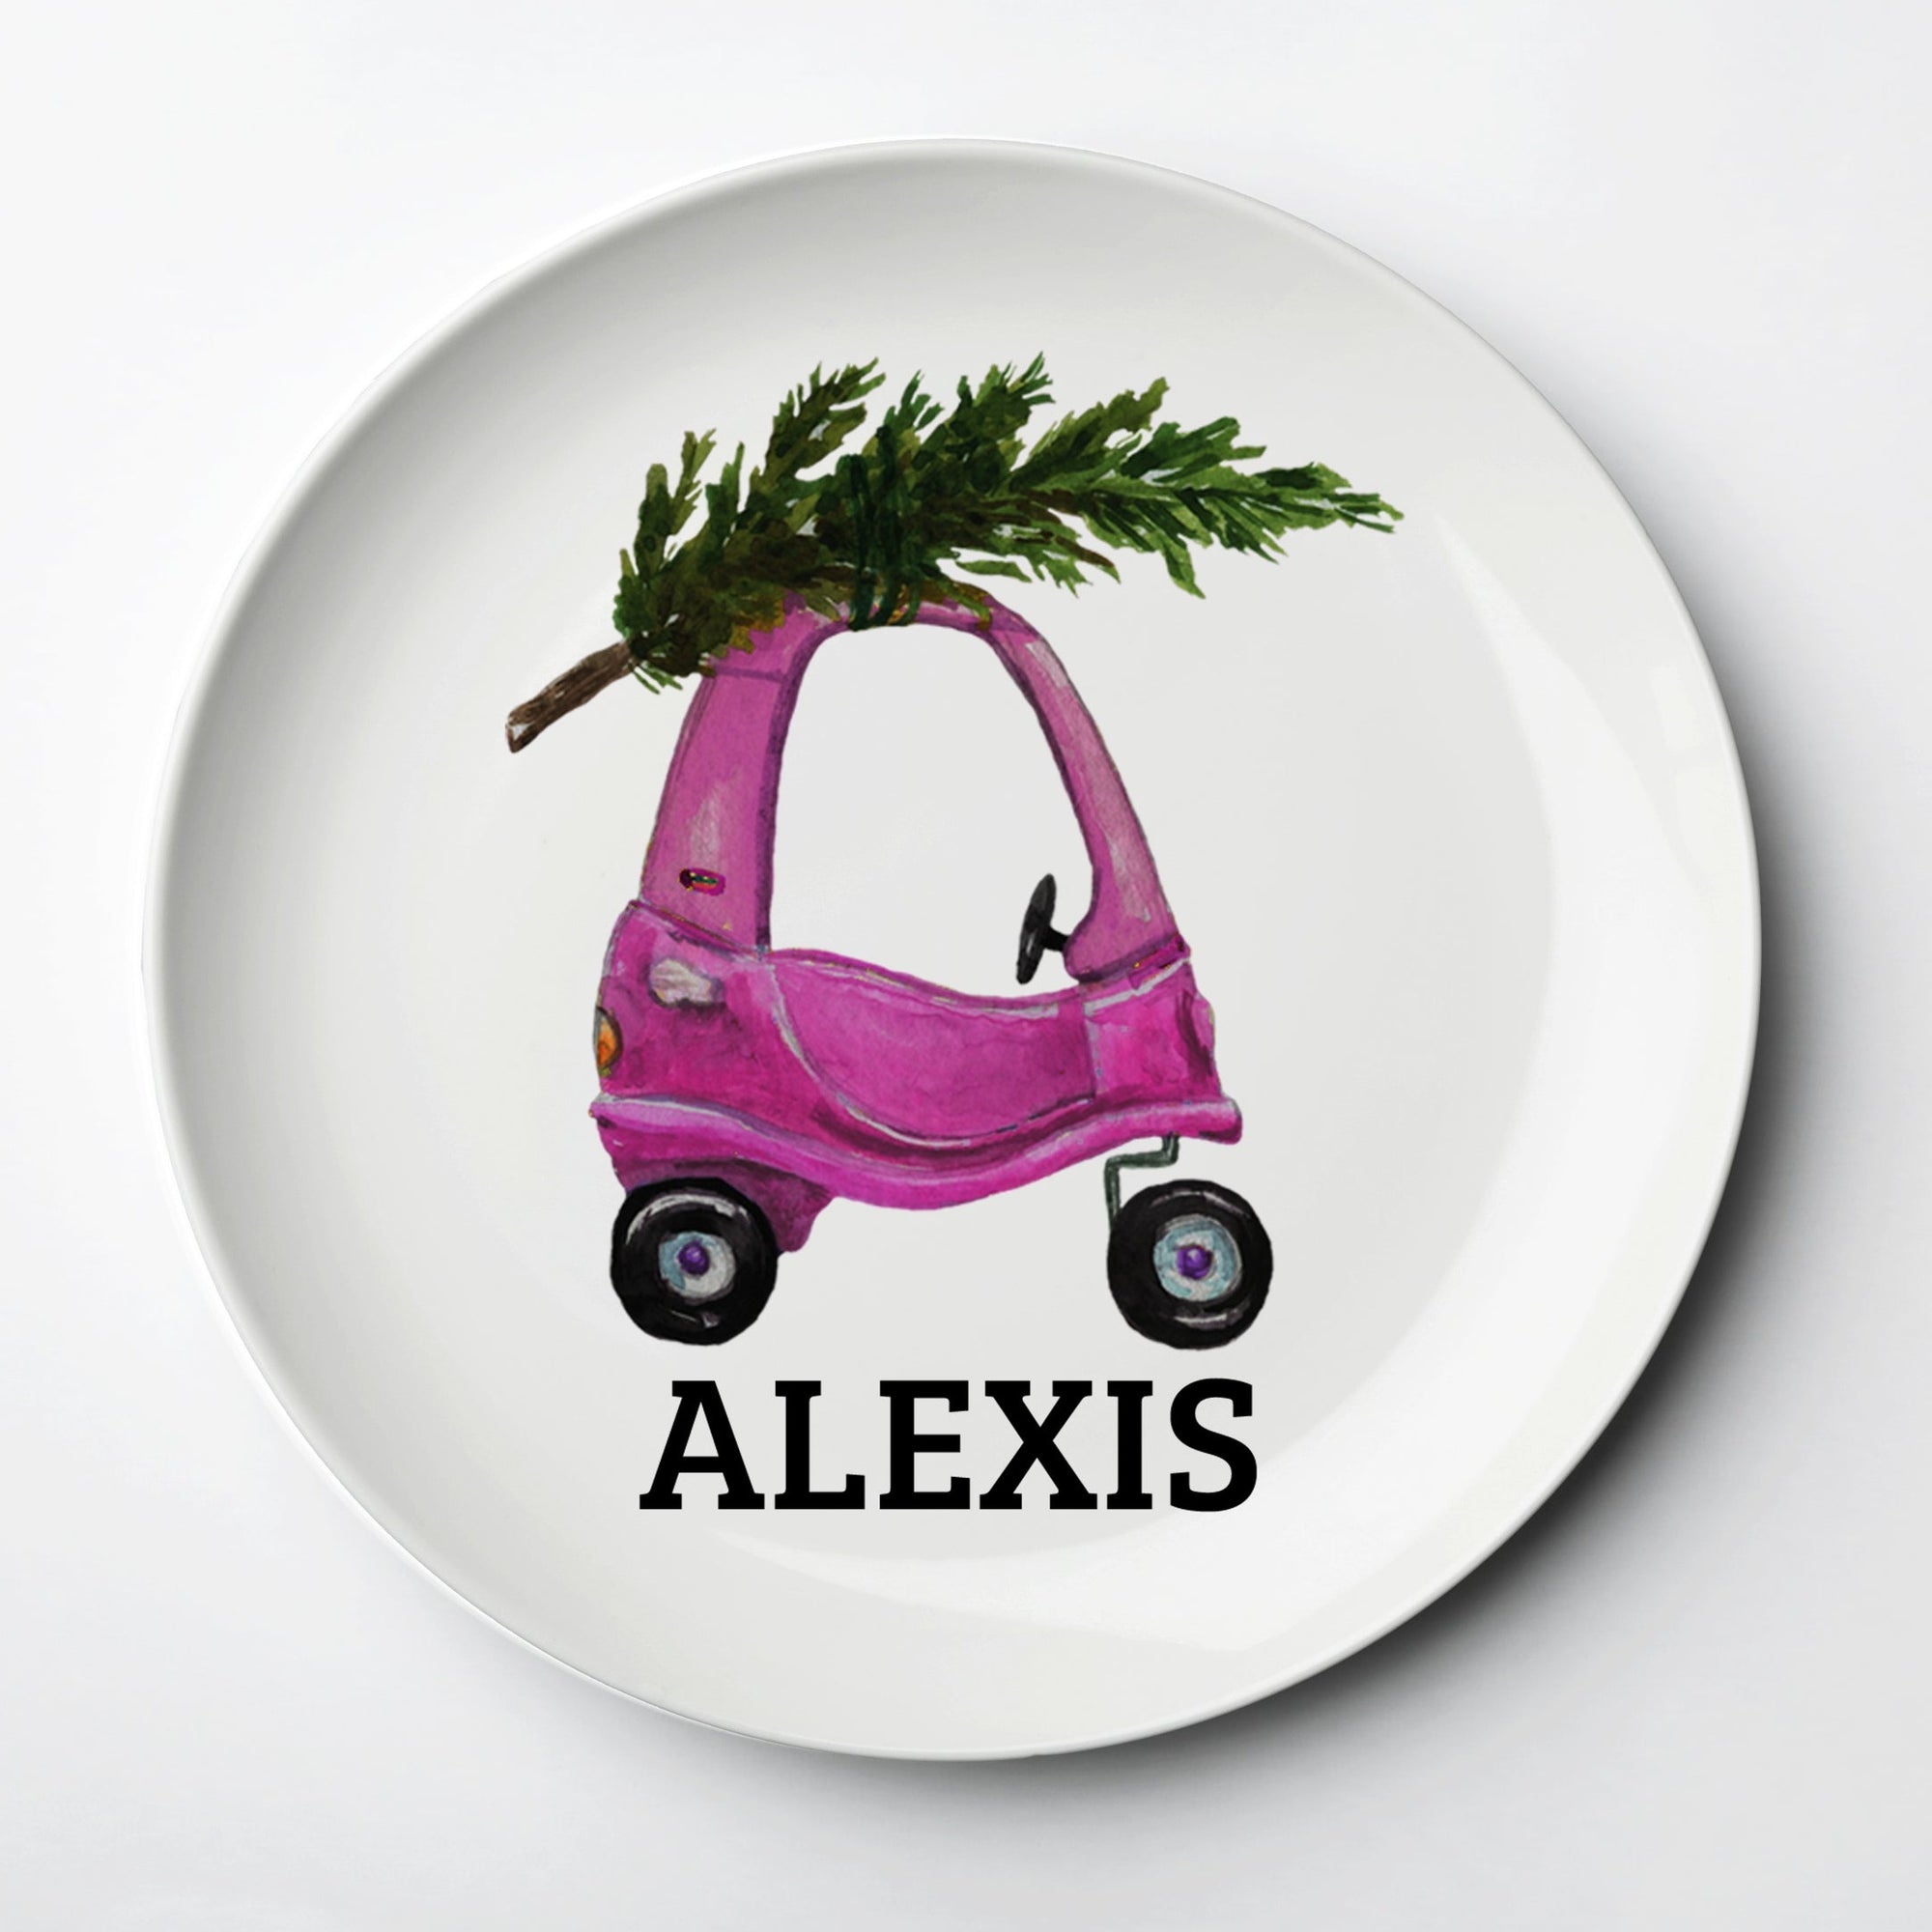 Toy Car Christmas Plate, Personalized Pink, will last for years, keepsake gift, dishwasher and microwave safe